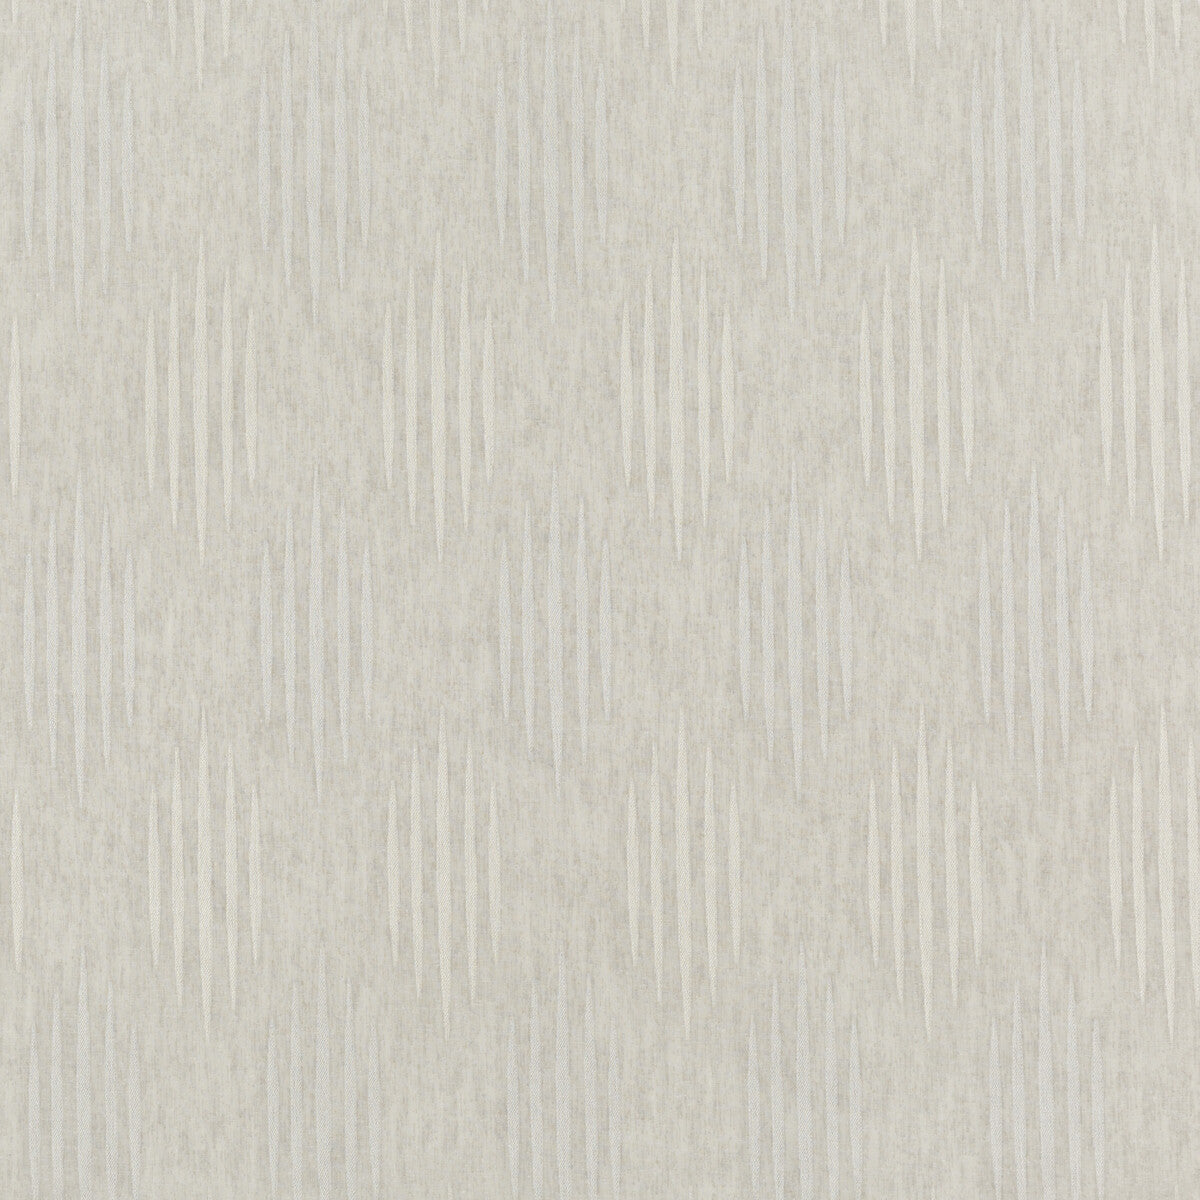 Windward Stripe fabric in dove grey color - pattern ED95006.910.0 - by Threads in the Meridian collection